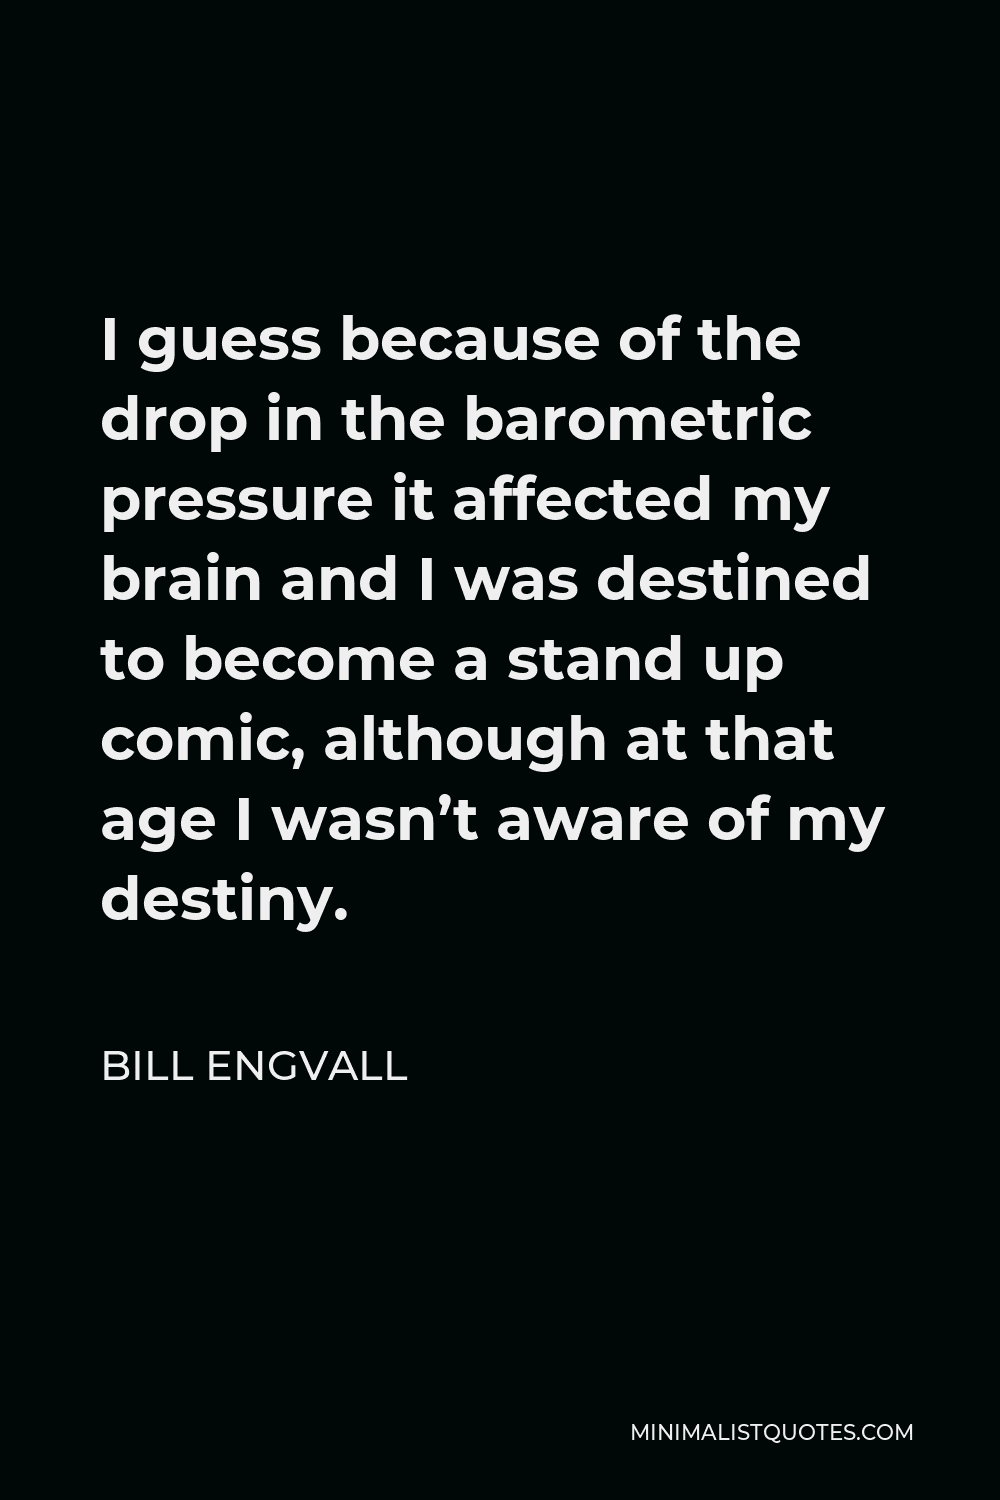 Bill Engvall Quote - I guess because of the drop in the barometric pressure it affected my brain and I was destined to become a stand up comic, although at that age I wasn’t aware of my destiny.